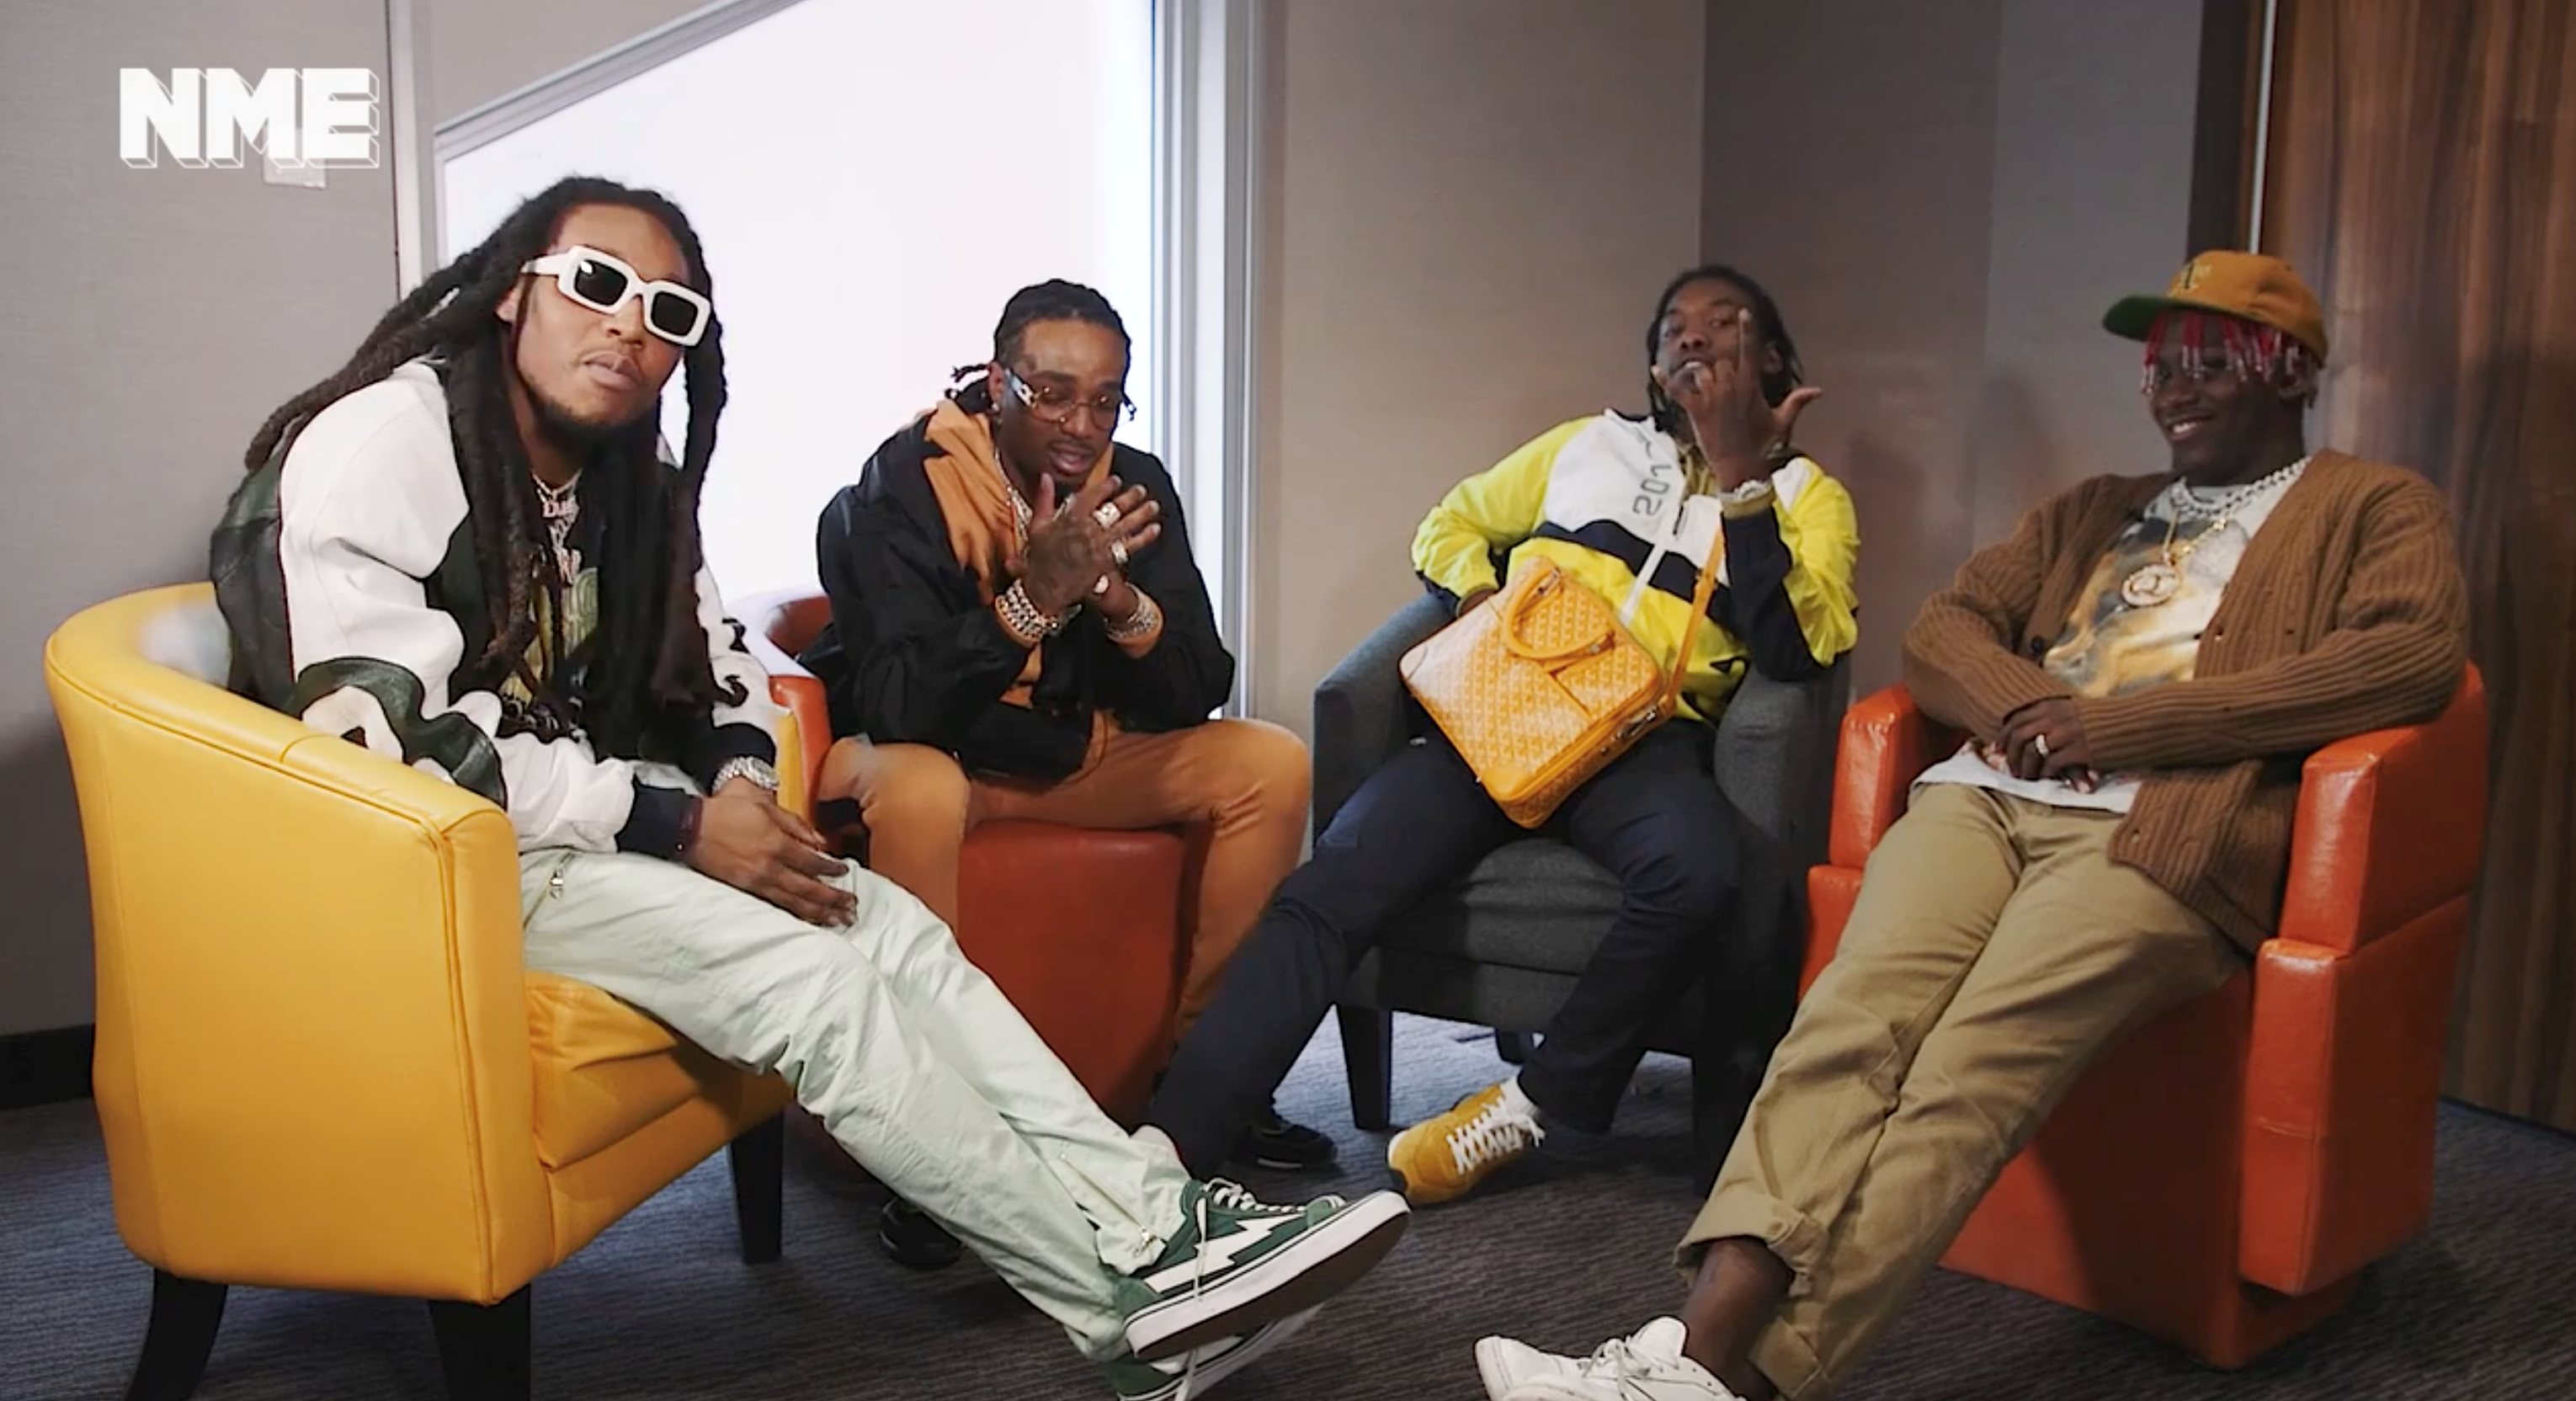 Migos & Lil Yachty Debate the Greatest Rapper of All-Time